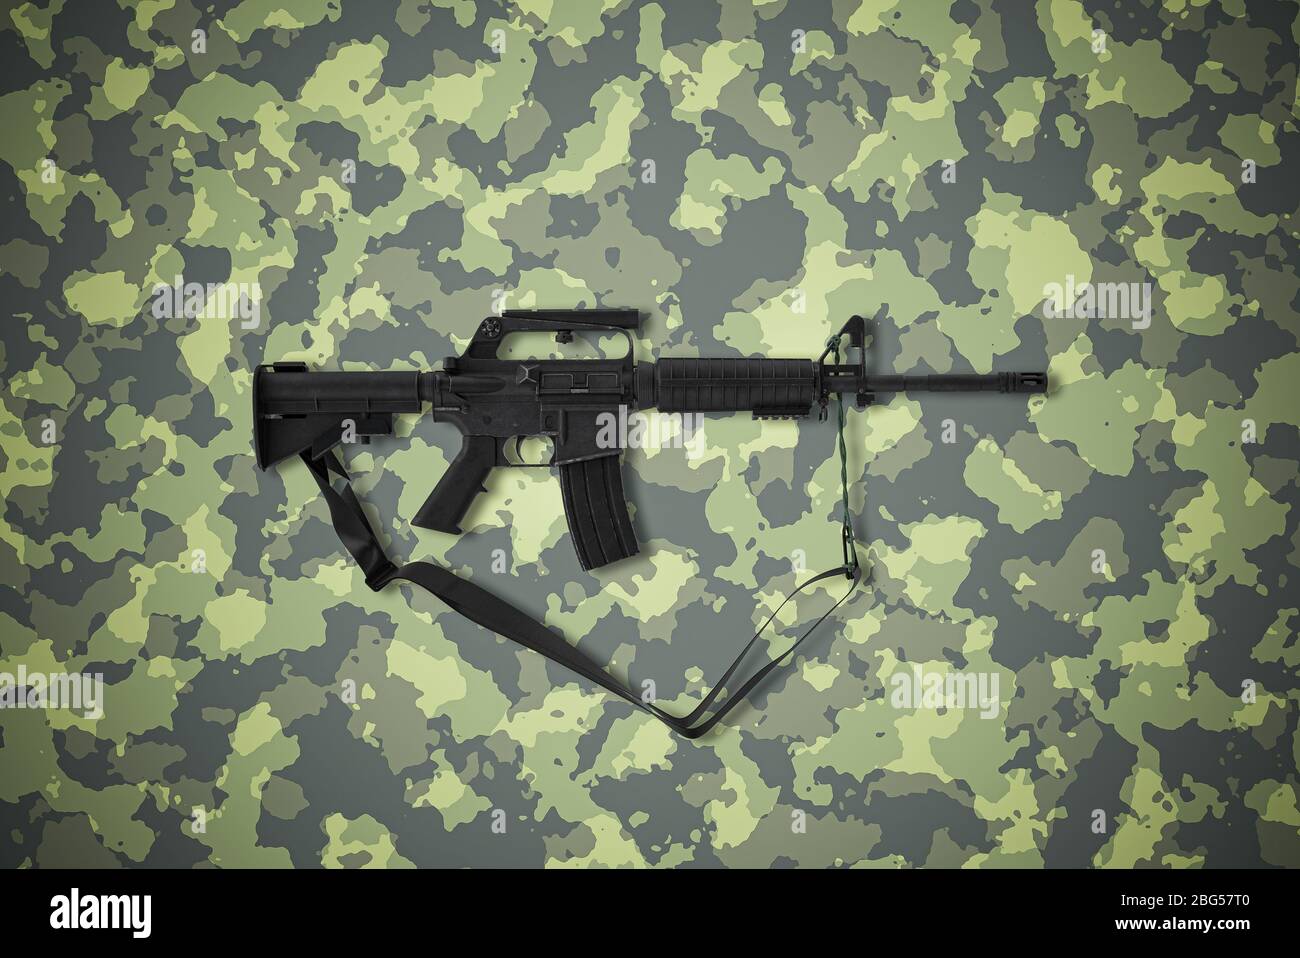 American caliber 5.56 mm rifle on camouflage background Stock Photo